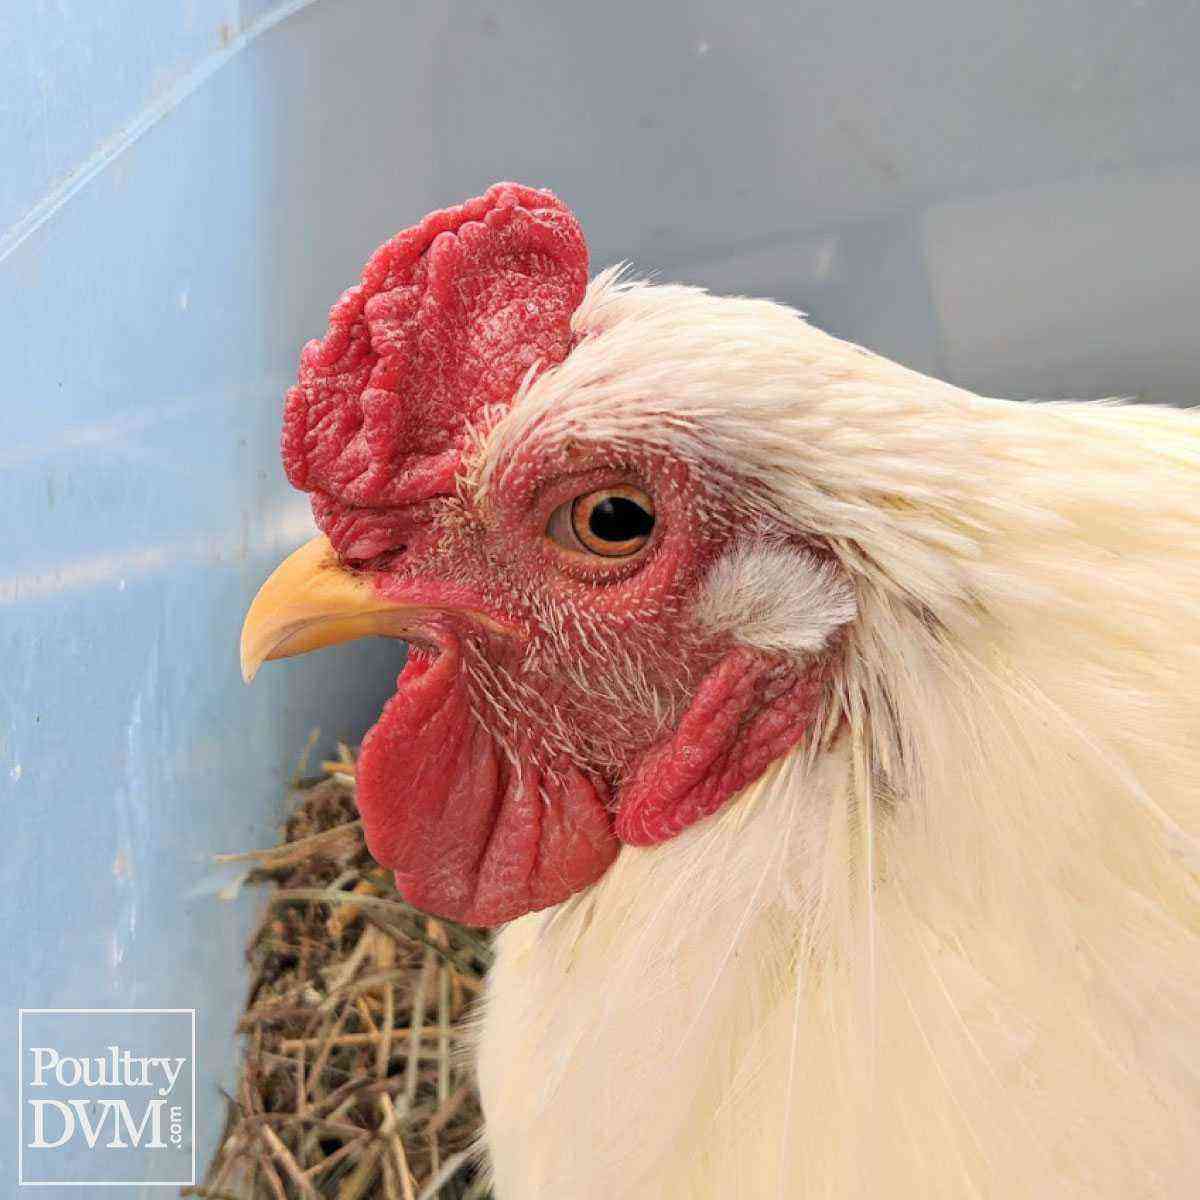 Chickens: Prevention and control of pasteurellosis